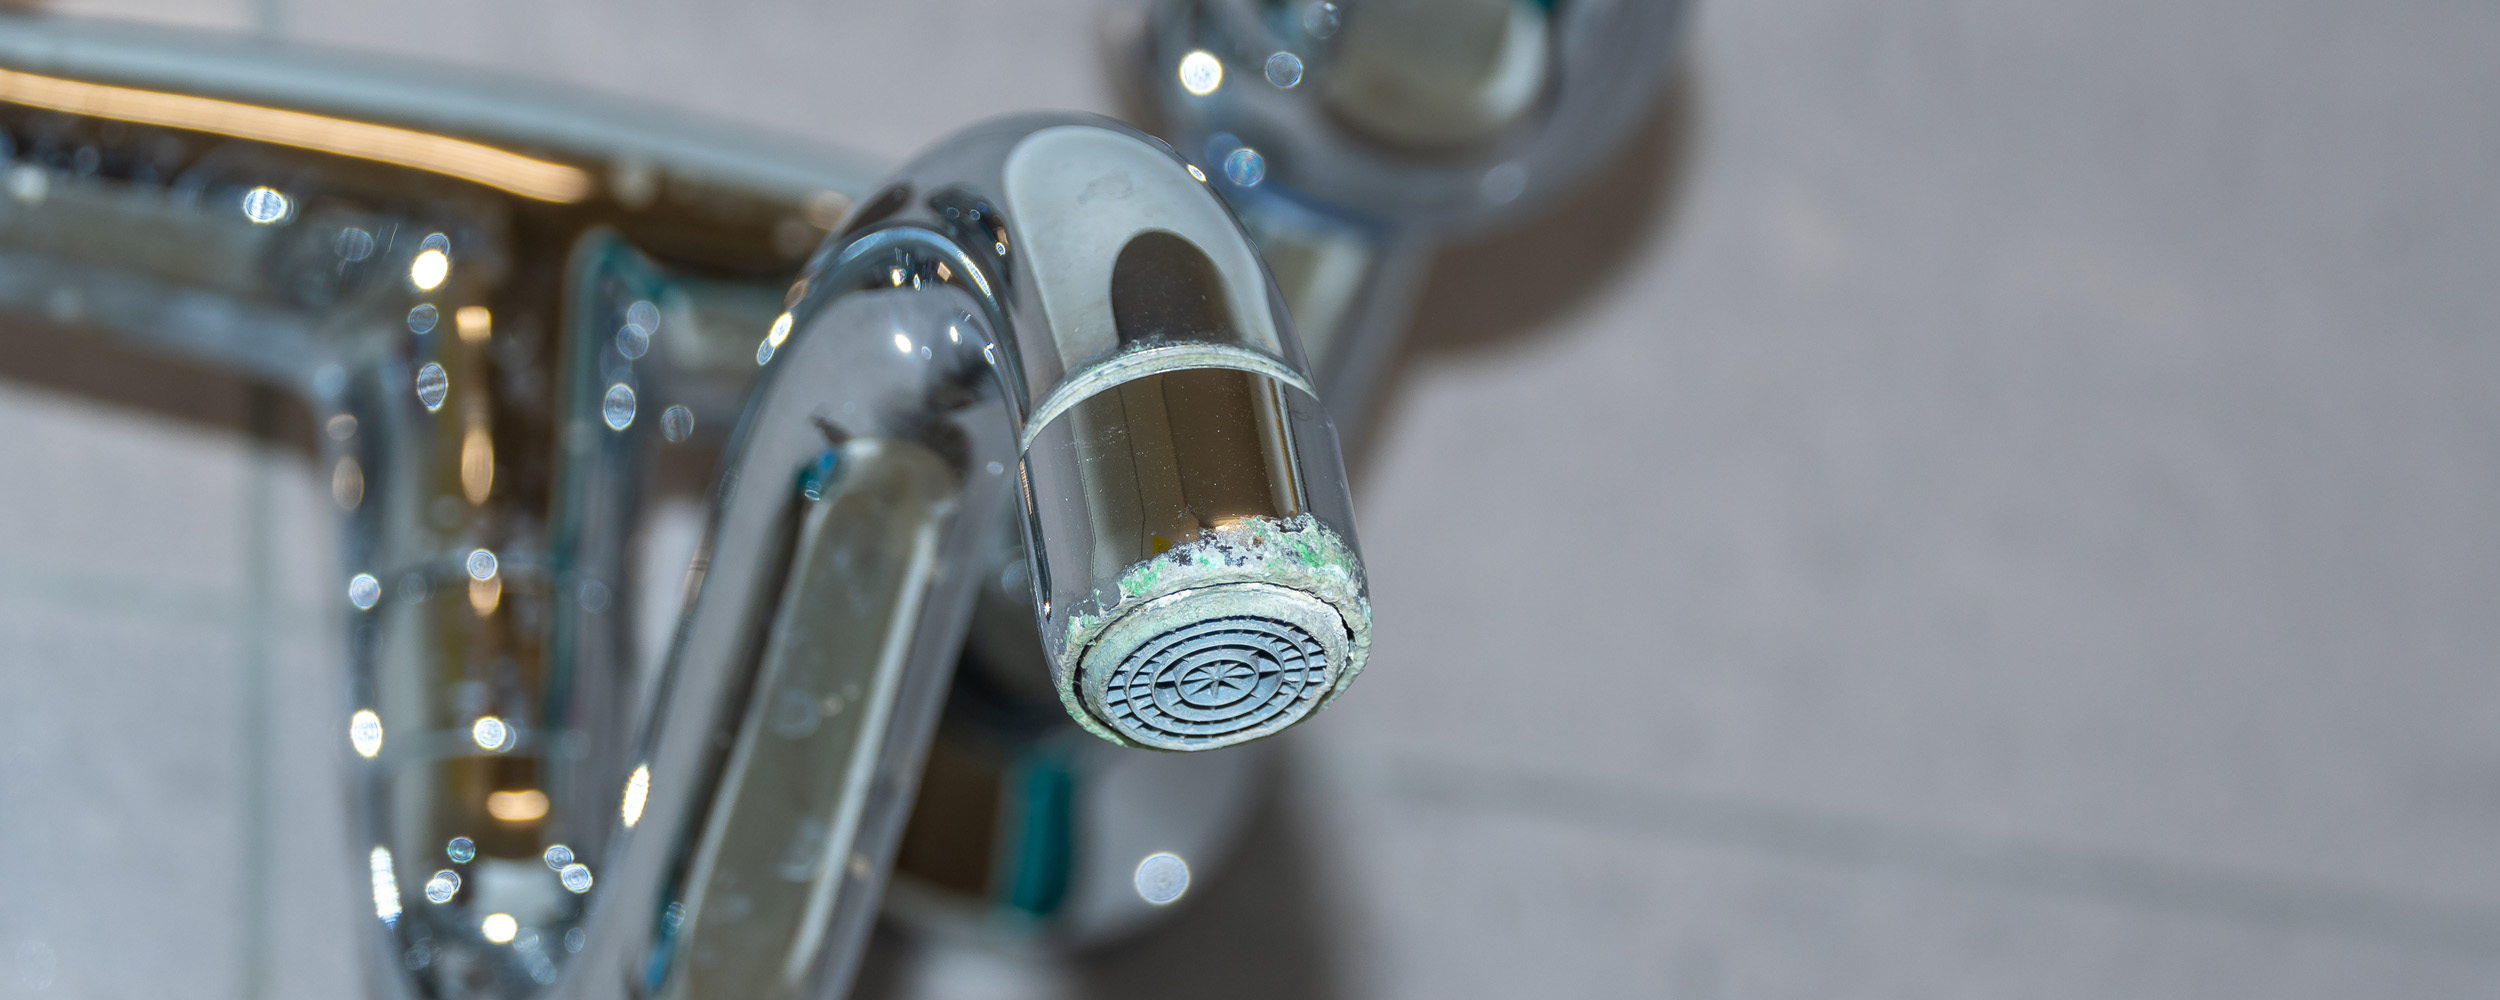 Corroded bathroom faucet